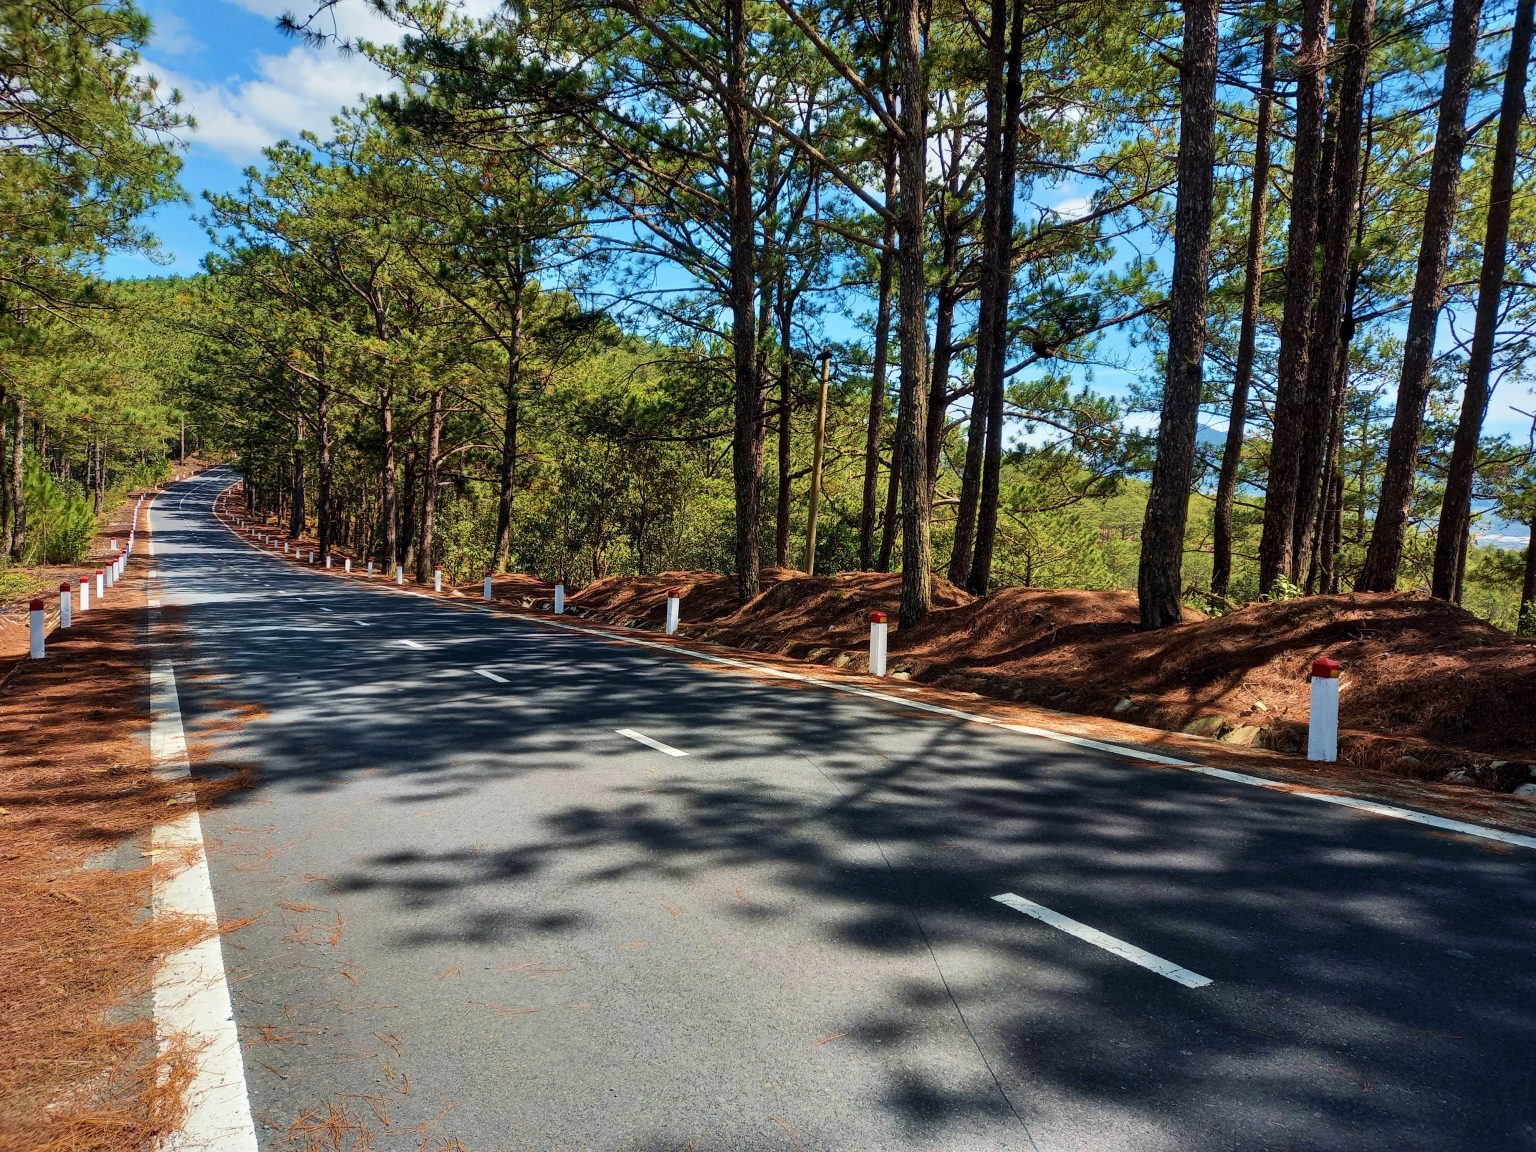 beautiful road under the pine trees - best motorcycle rides in Vietnam